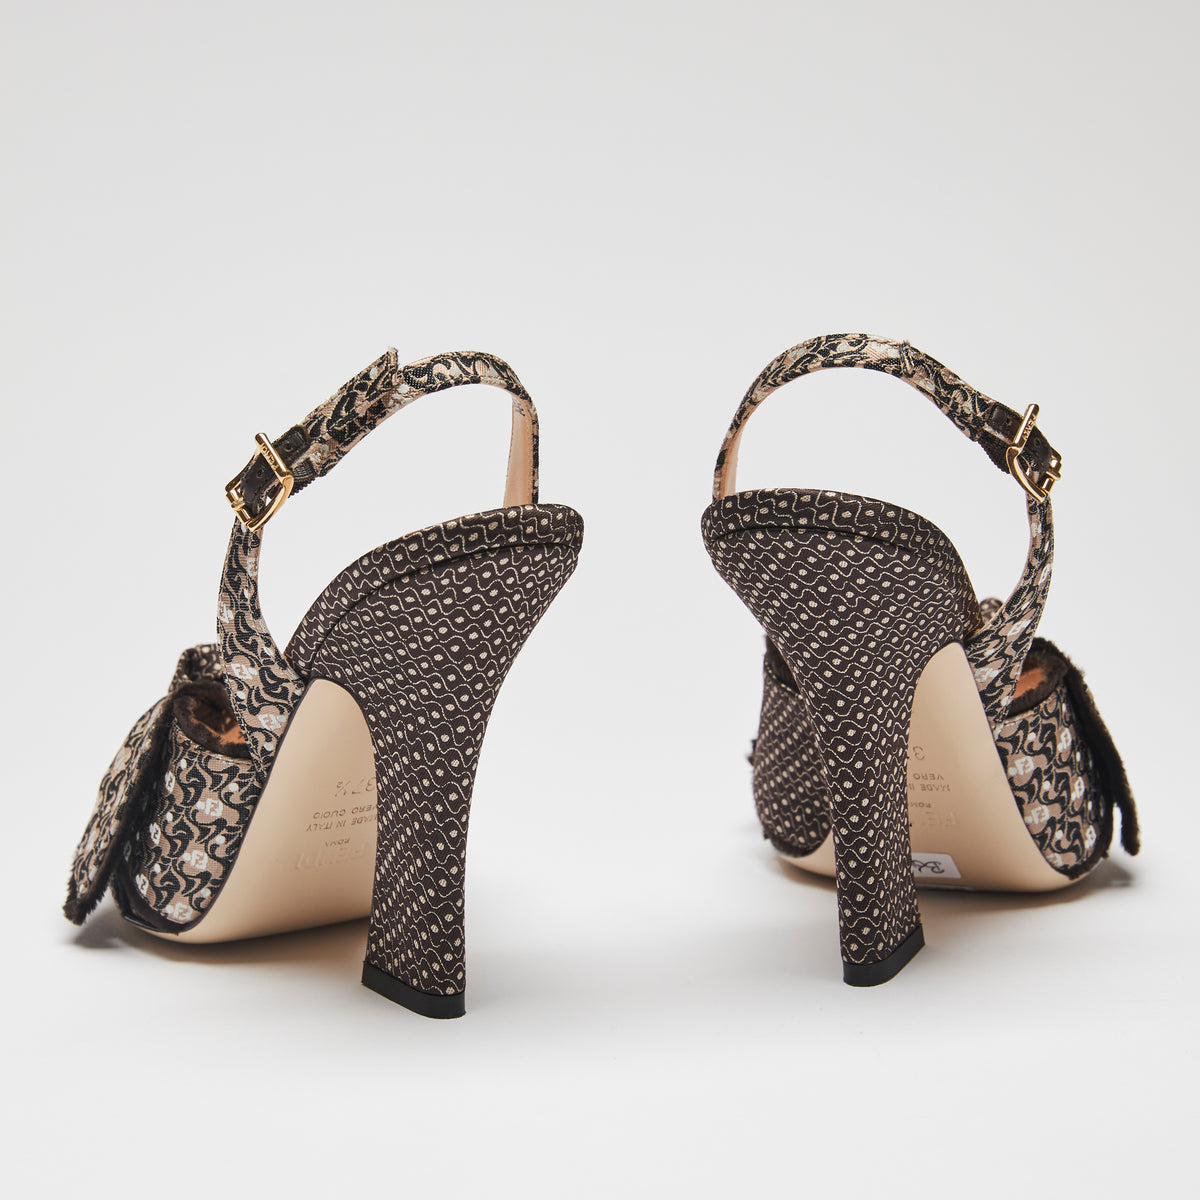 Excellent Pre-Loved Beige and Brown Patterned Fabric Open Toe Sling Back Sandals with Adjustable Ankle Straps (back)